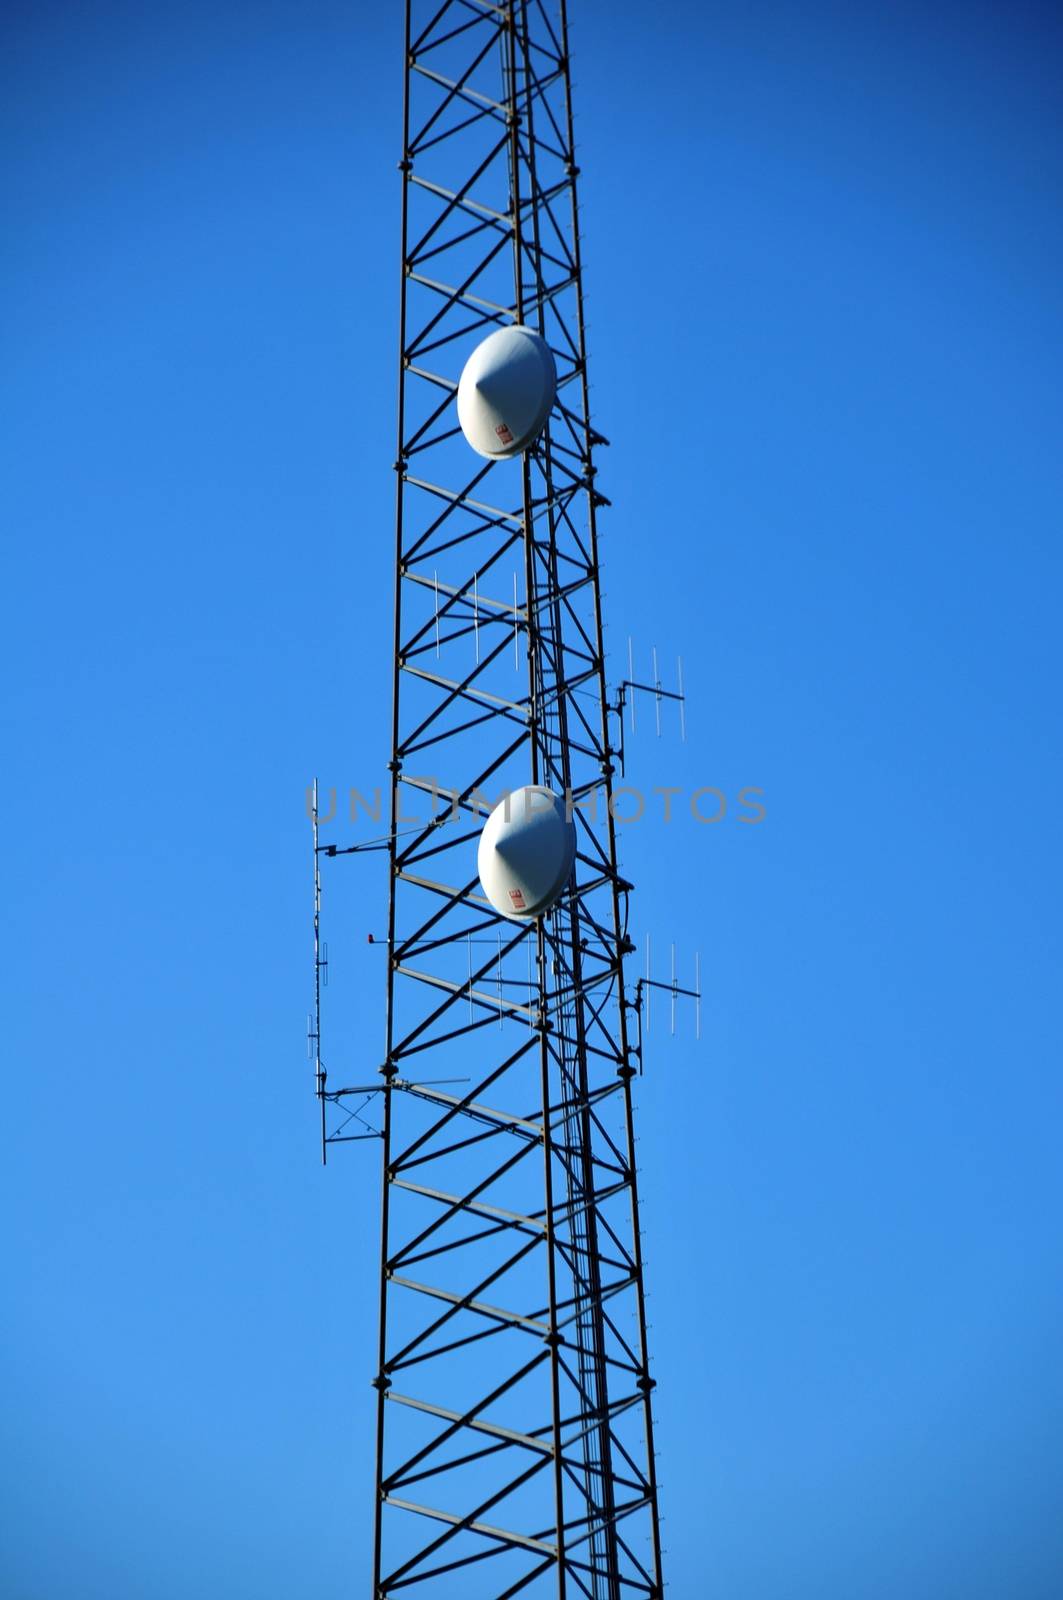 GSM Tower on the Blue Sky. Cellular Tower with Antennas